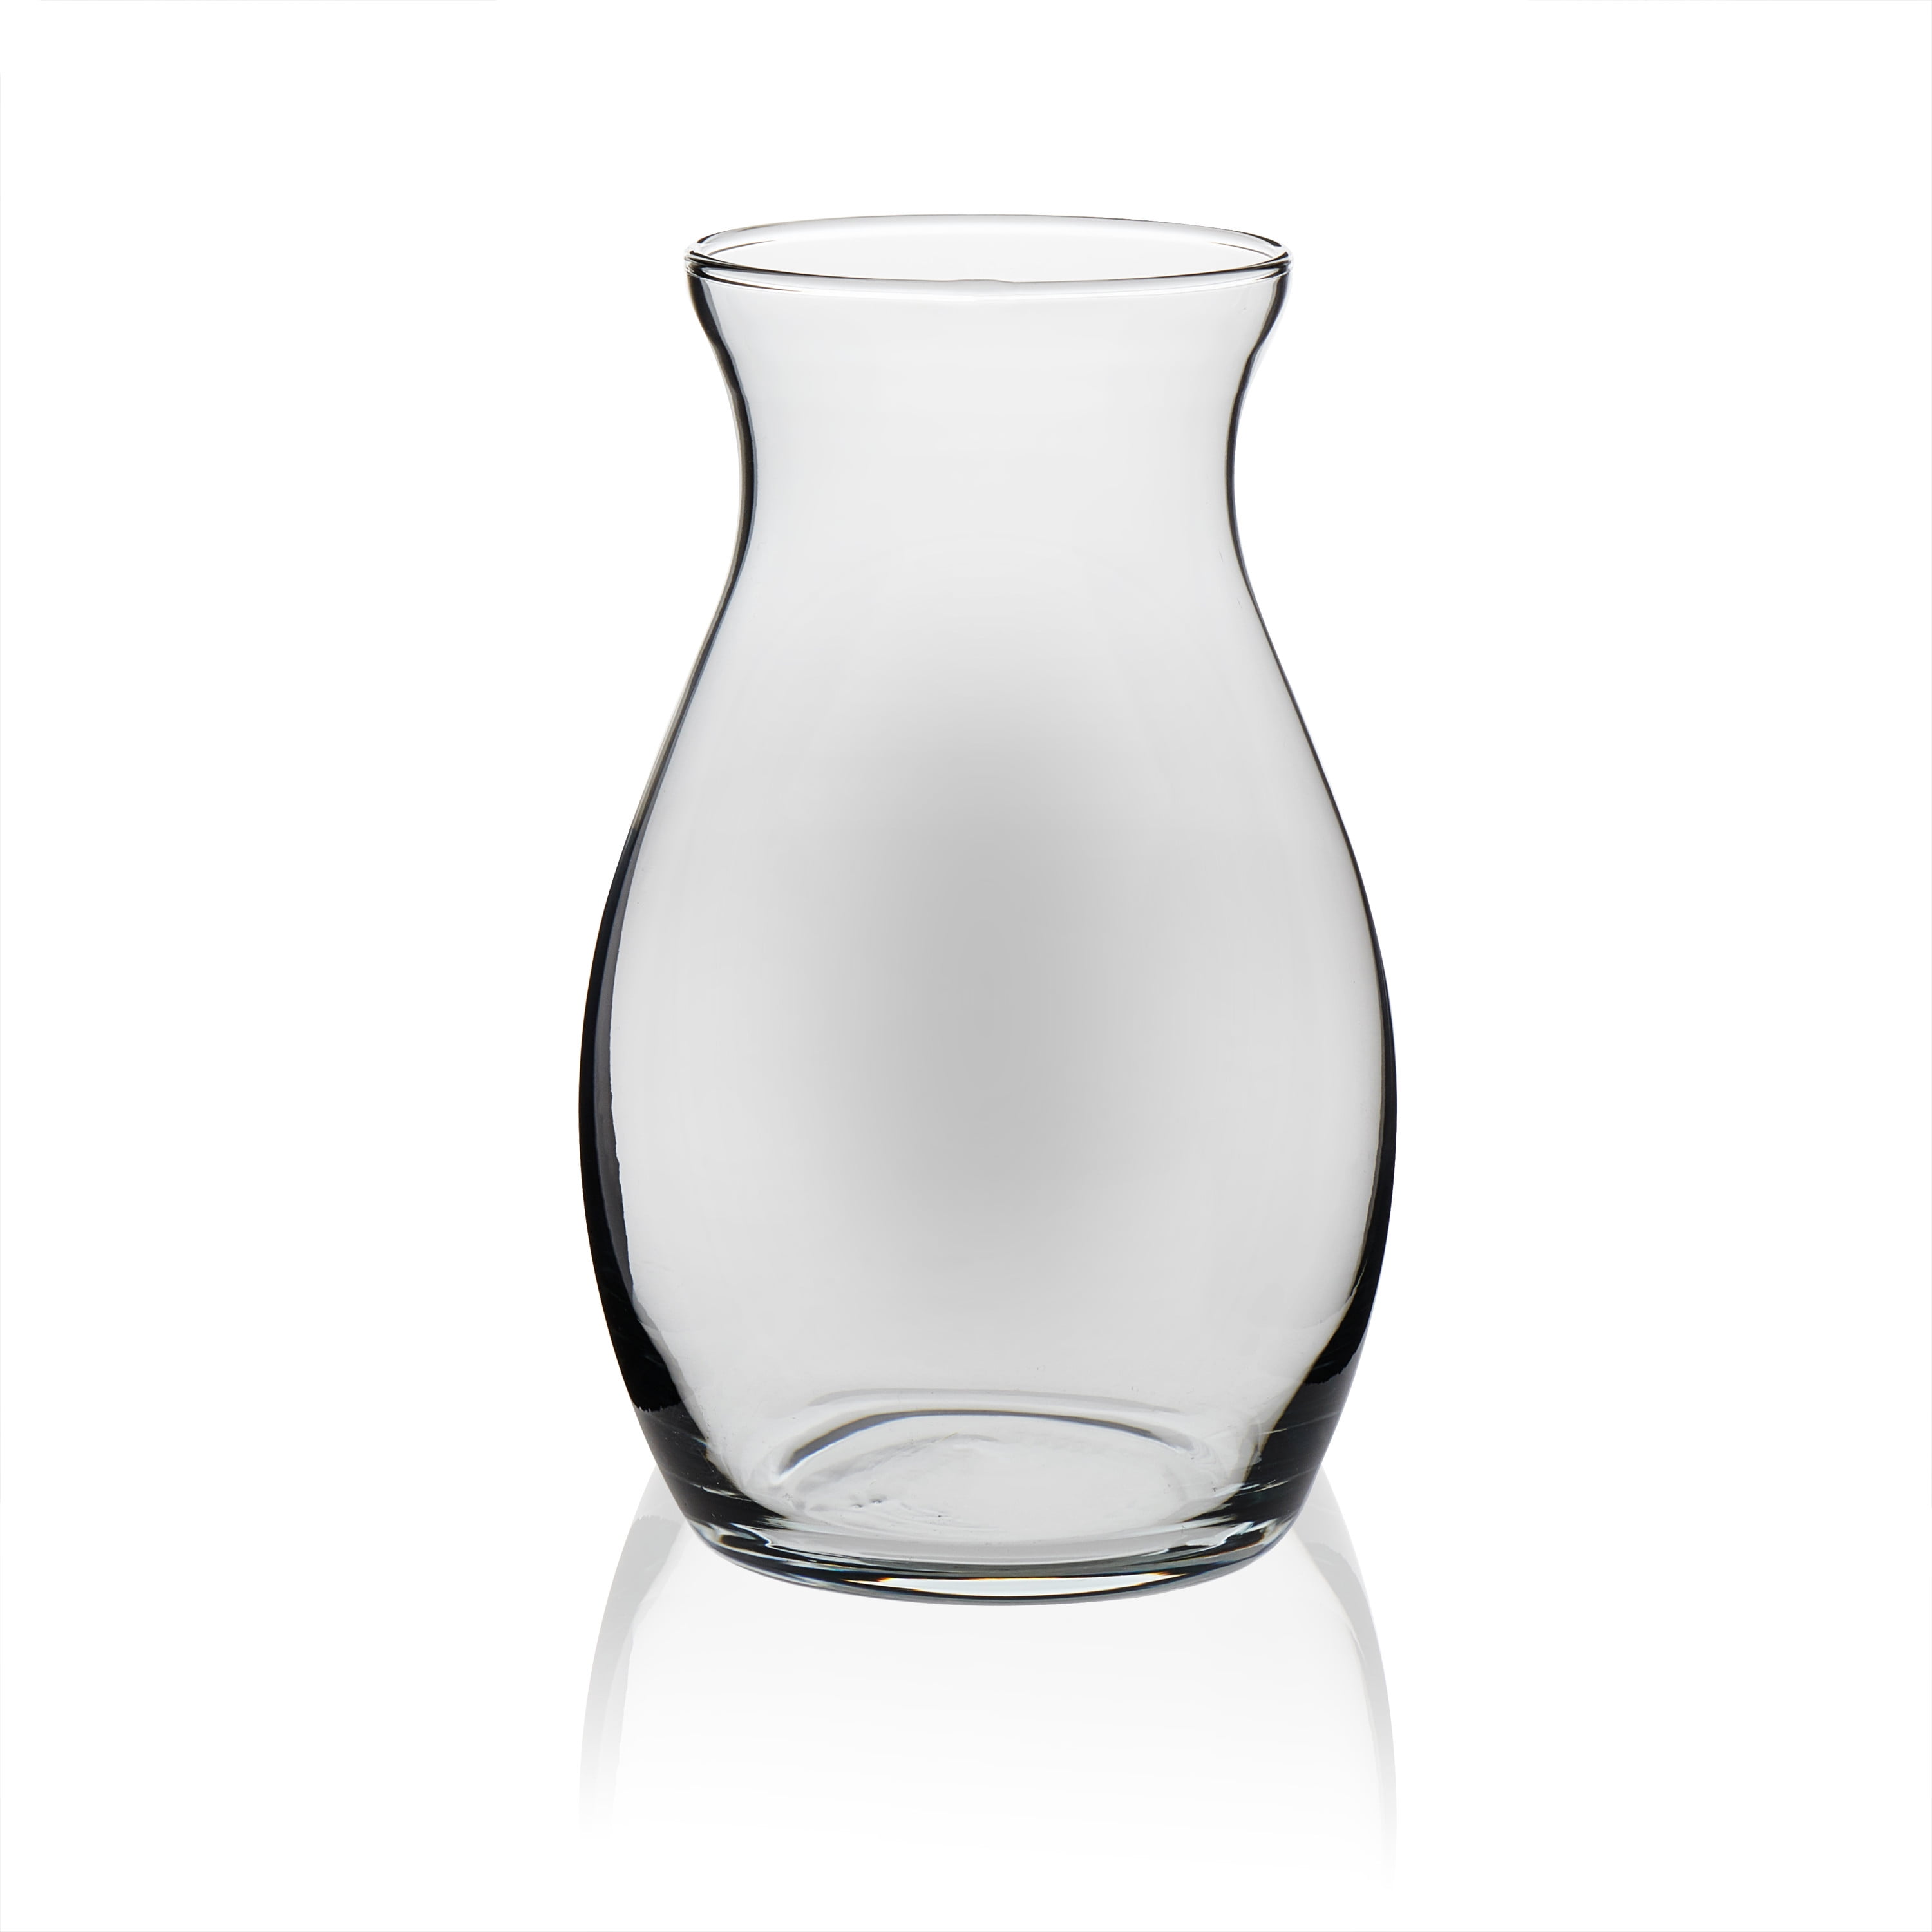 Libbey Pot Belly Clear Glass  Vase, 7 Inch, 1 Each